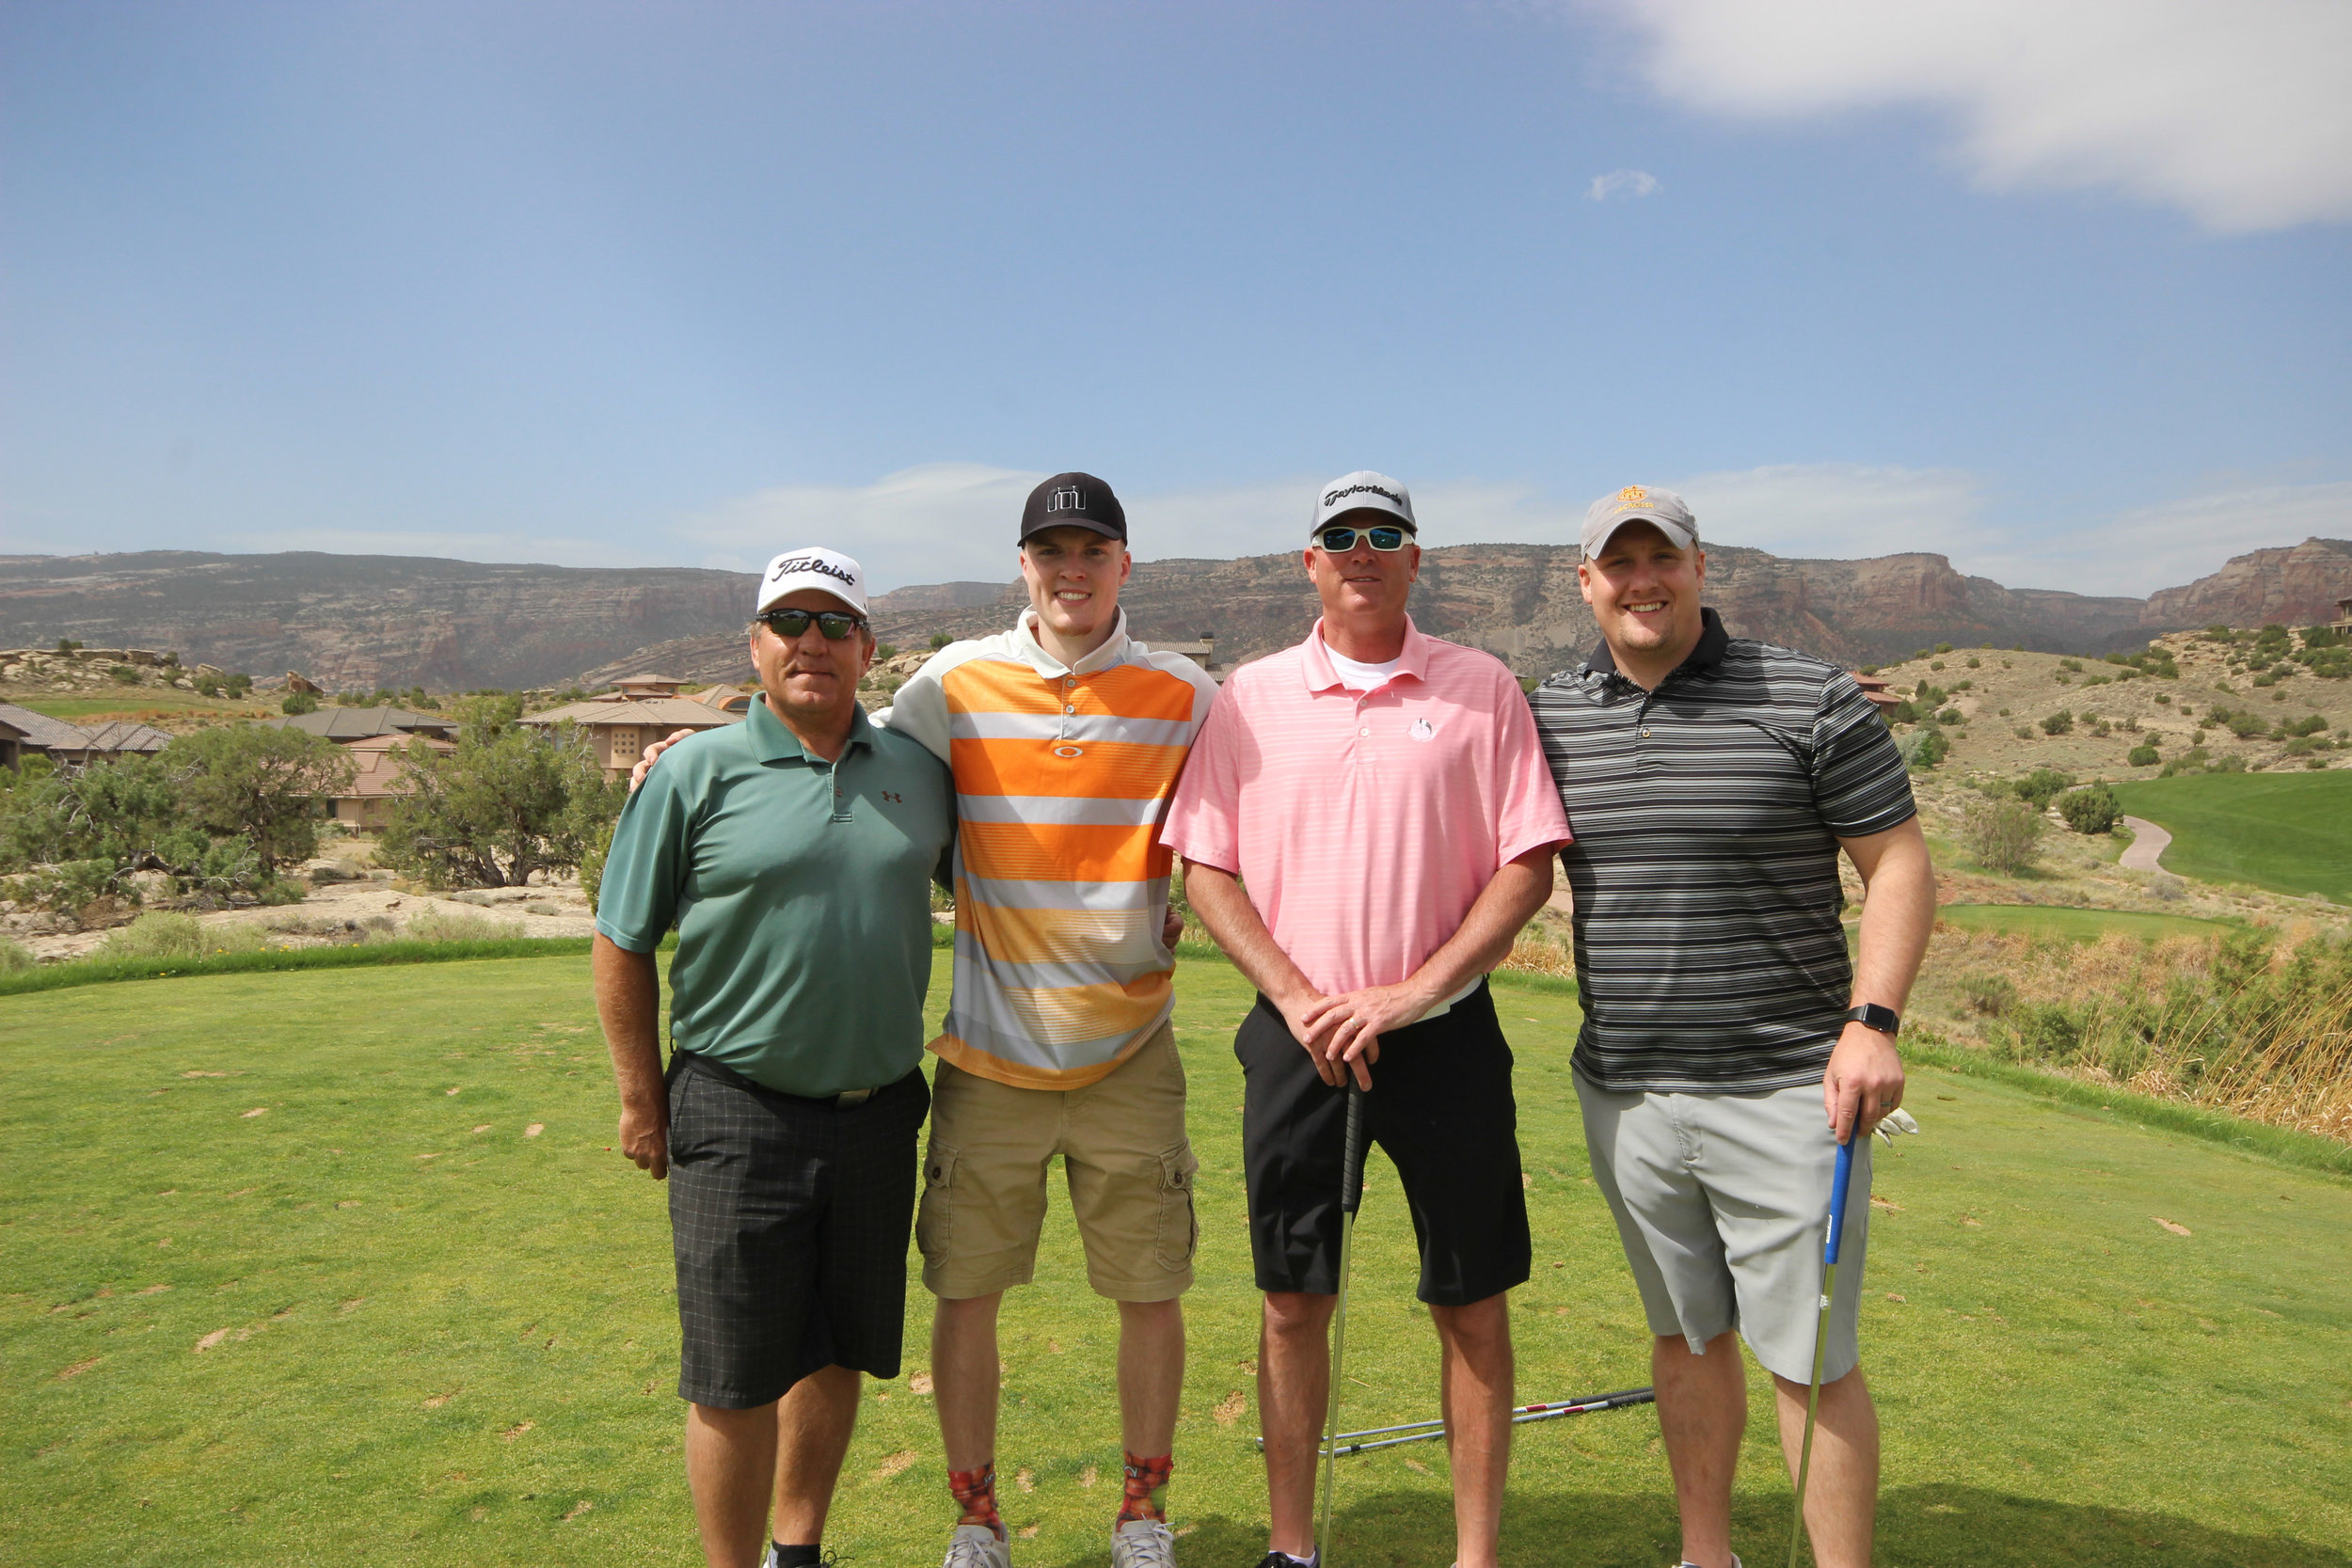 Tee Off for Testicular Cancer Adobe Creek Grand Junction